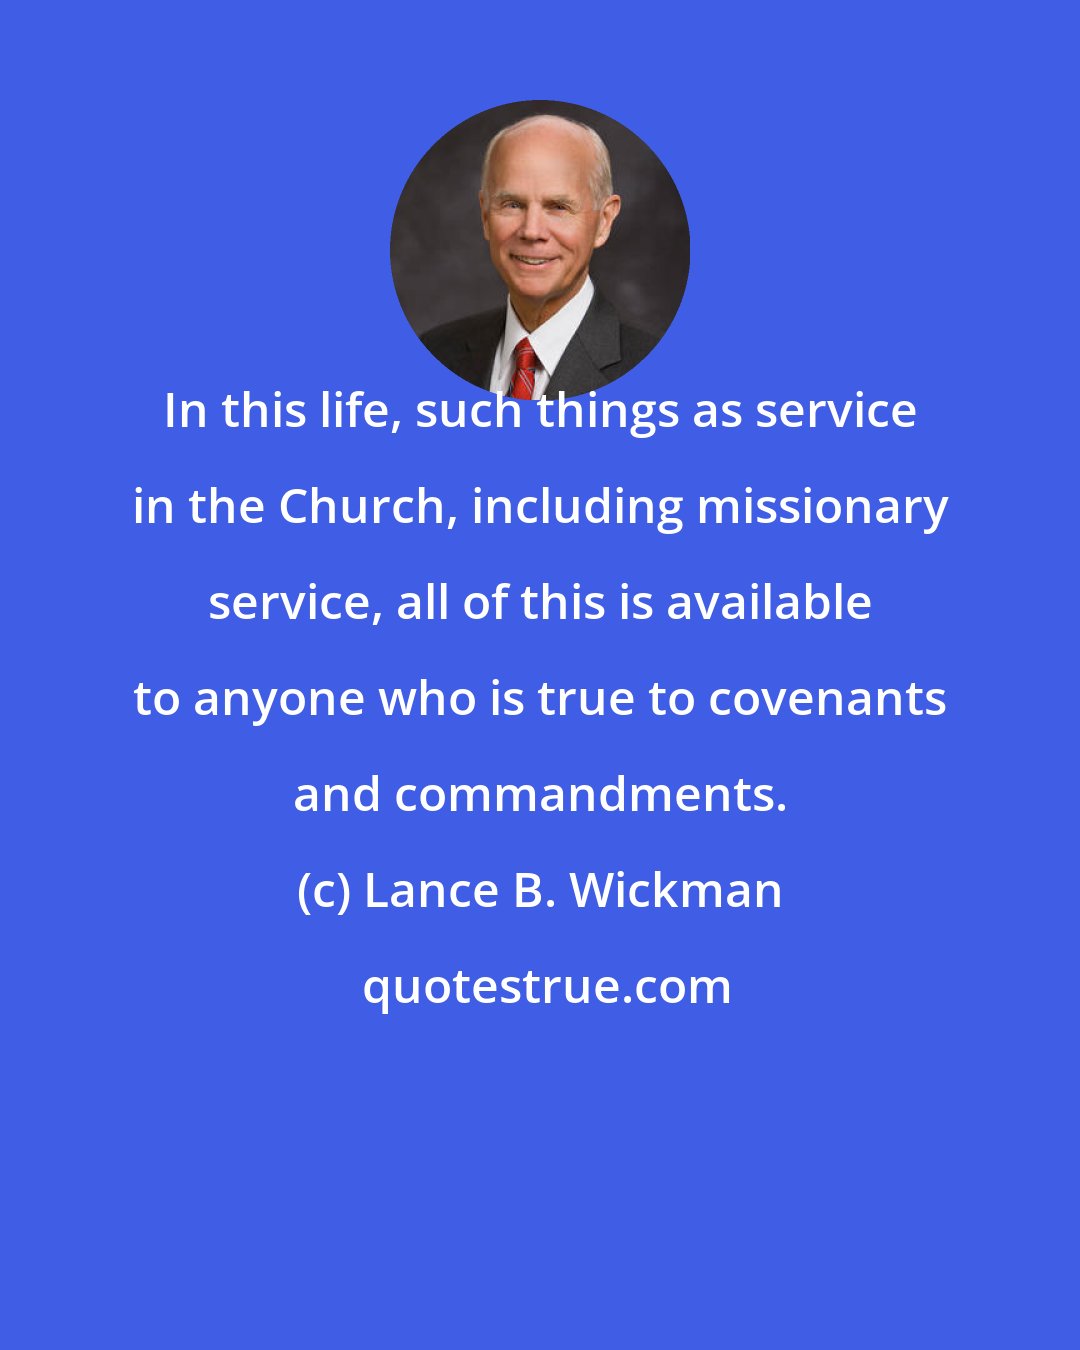 Lance B. Wickman: In this life, such things as service in the Church, including missionary service, all of this is available to anyone who is true to covenants and commandments.